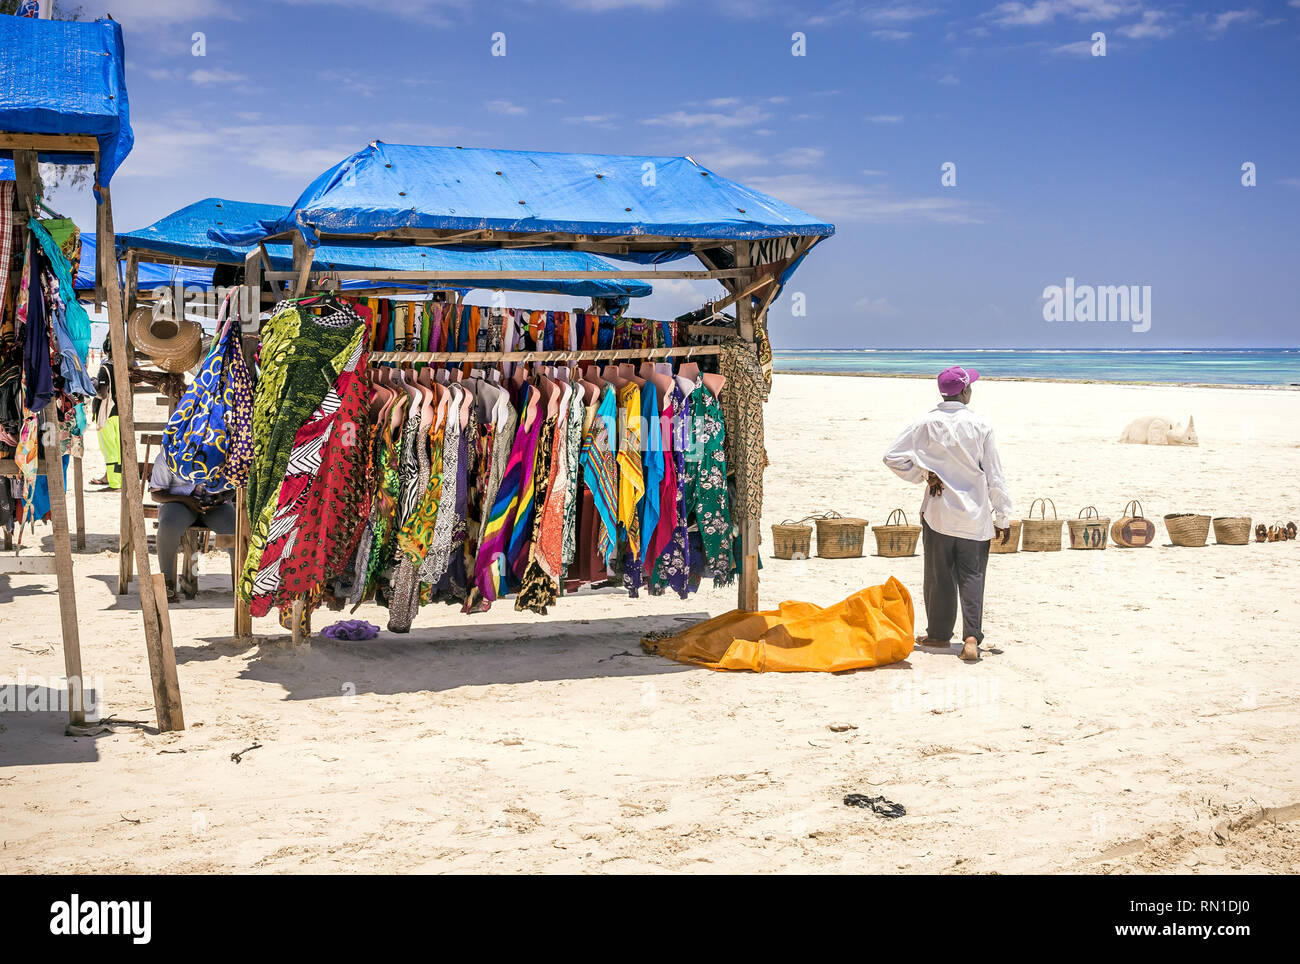 DIANI BEACH, KENYA - OCTOBER 10, 2018: Native african man and typical wooden stall with colorful fabrics on Diani beach, Kenya Stock Photo